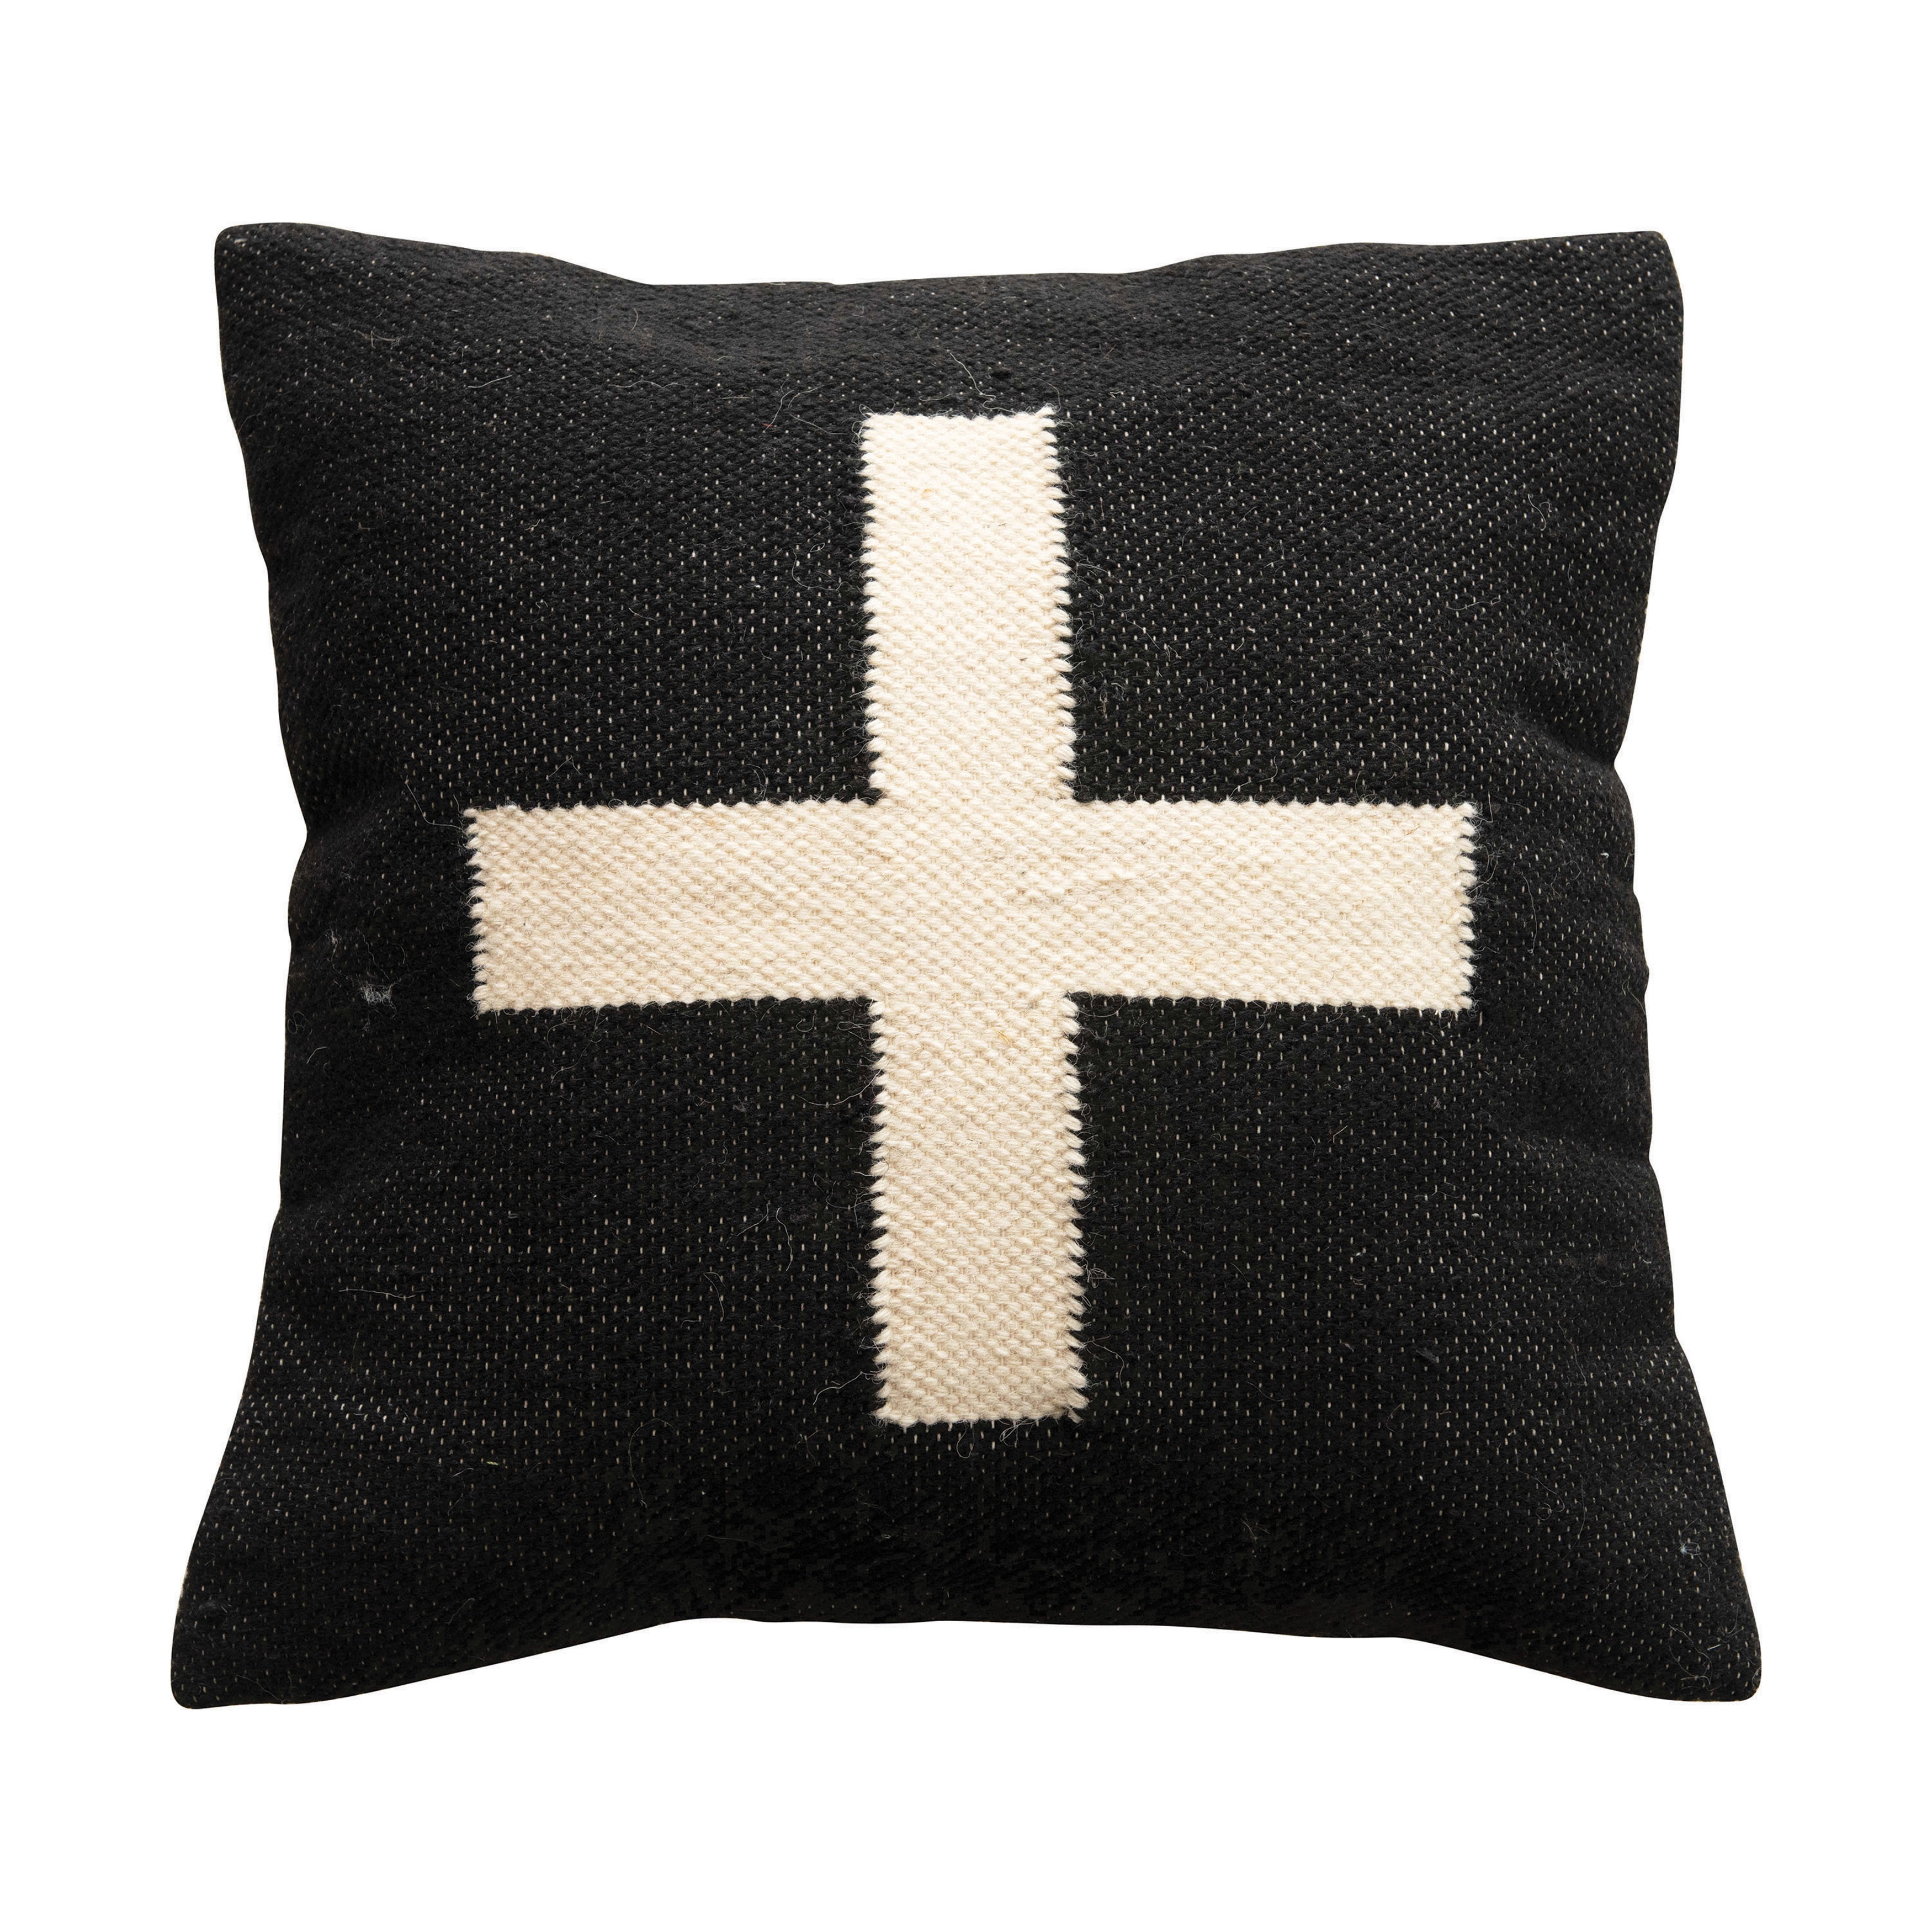 Wool Blend Pillow with Swiss Cross, Black & Cream Color - Image 0